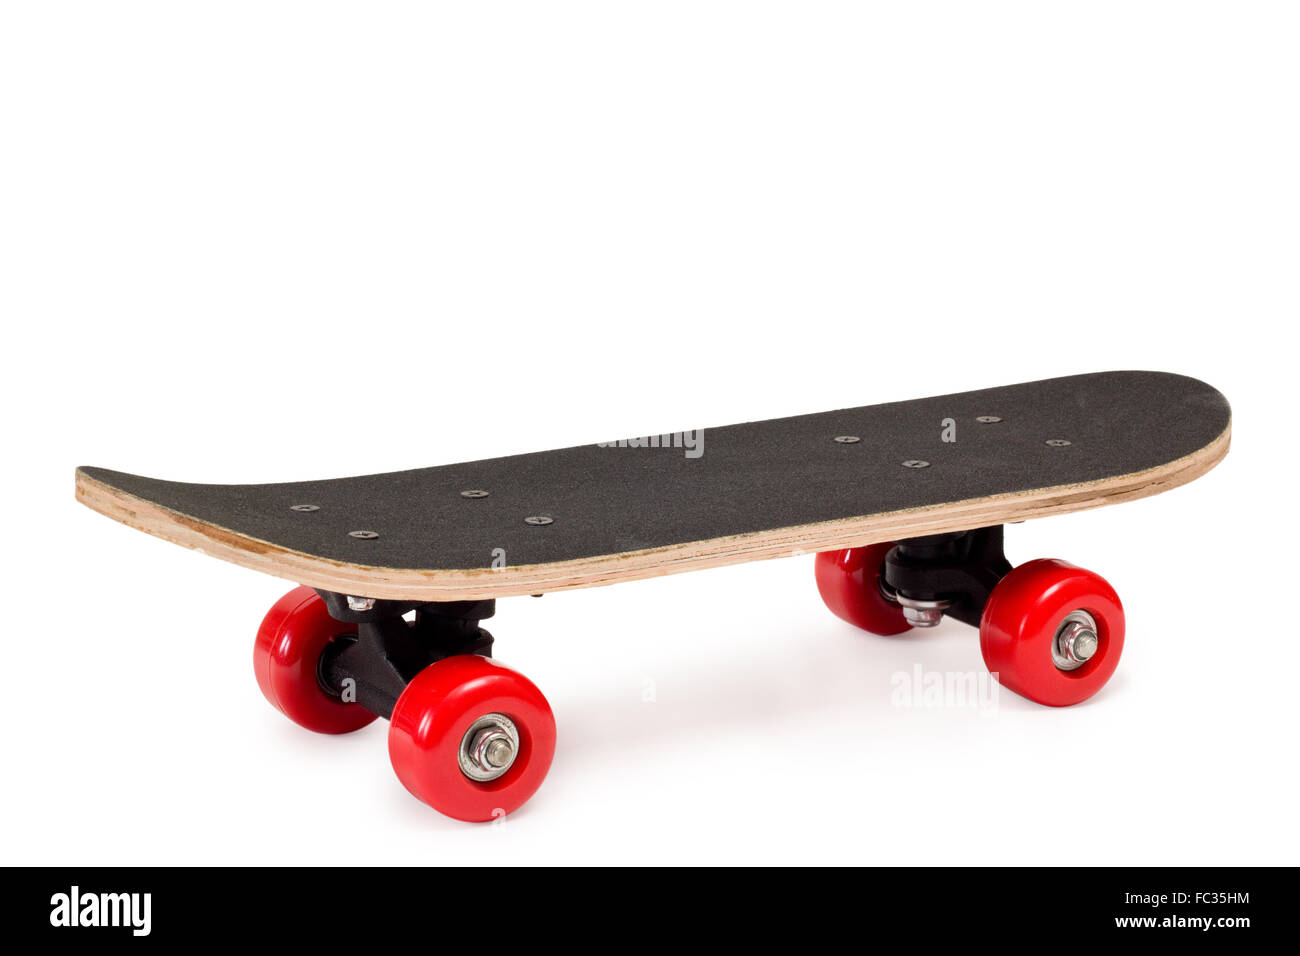 Skateboard with red wheels Stock Photo